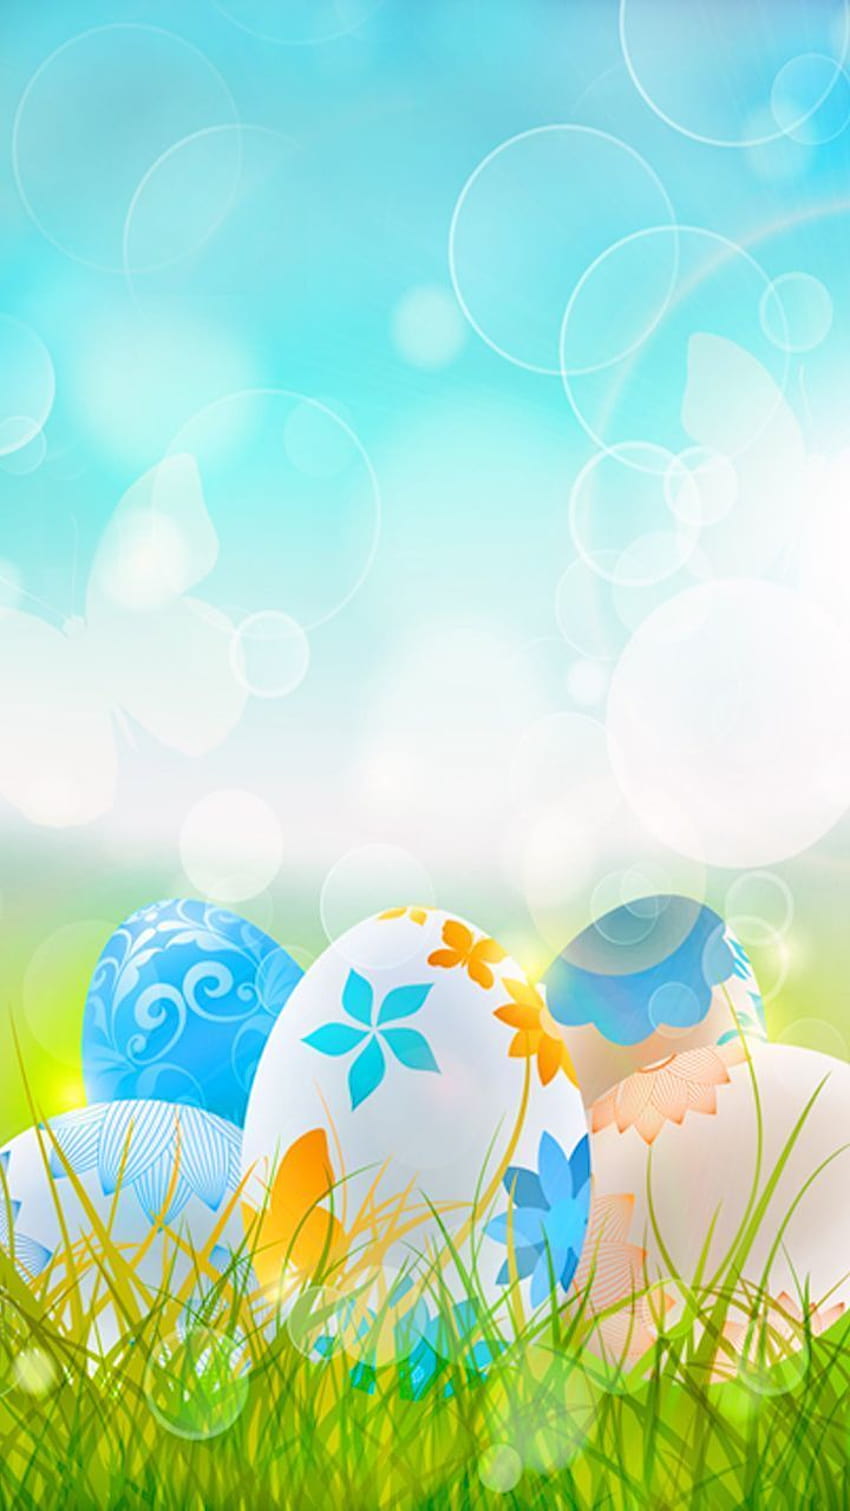 25 Cute Easter Backgrounds For Iphone in 2021, 2021 happy easter HD phone wallpaper